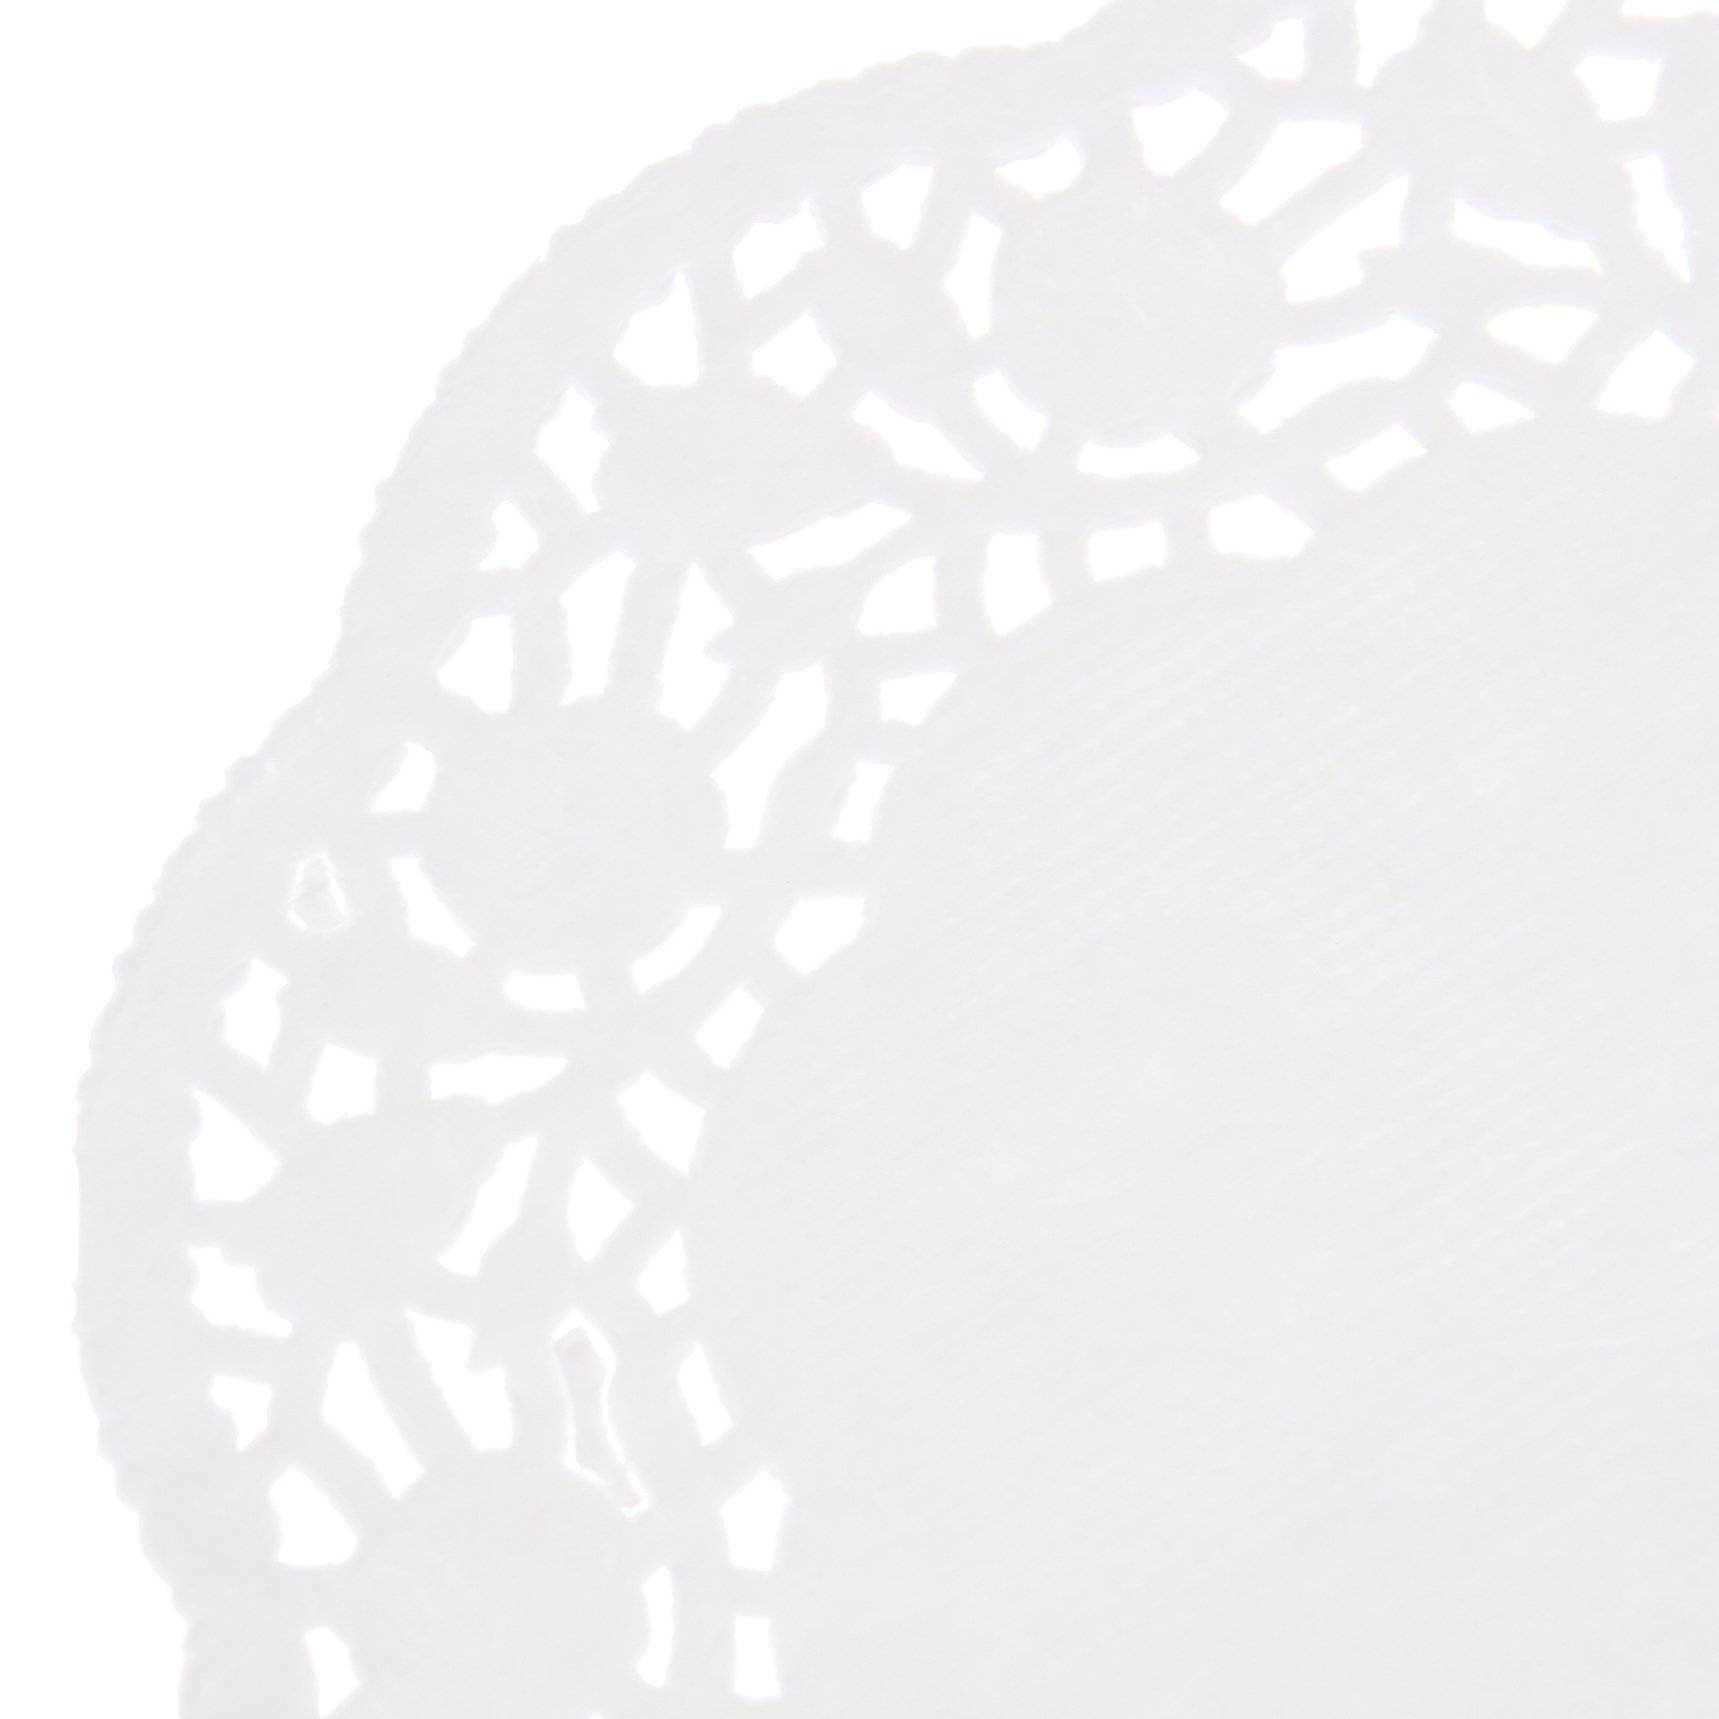 Round Paper Doilies - Hotpack Global